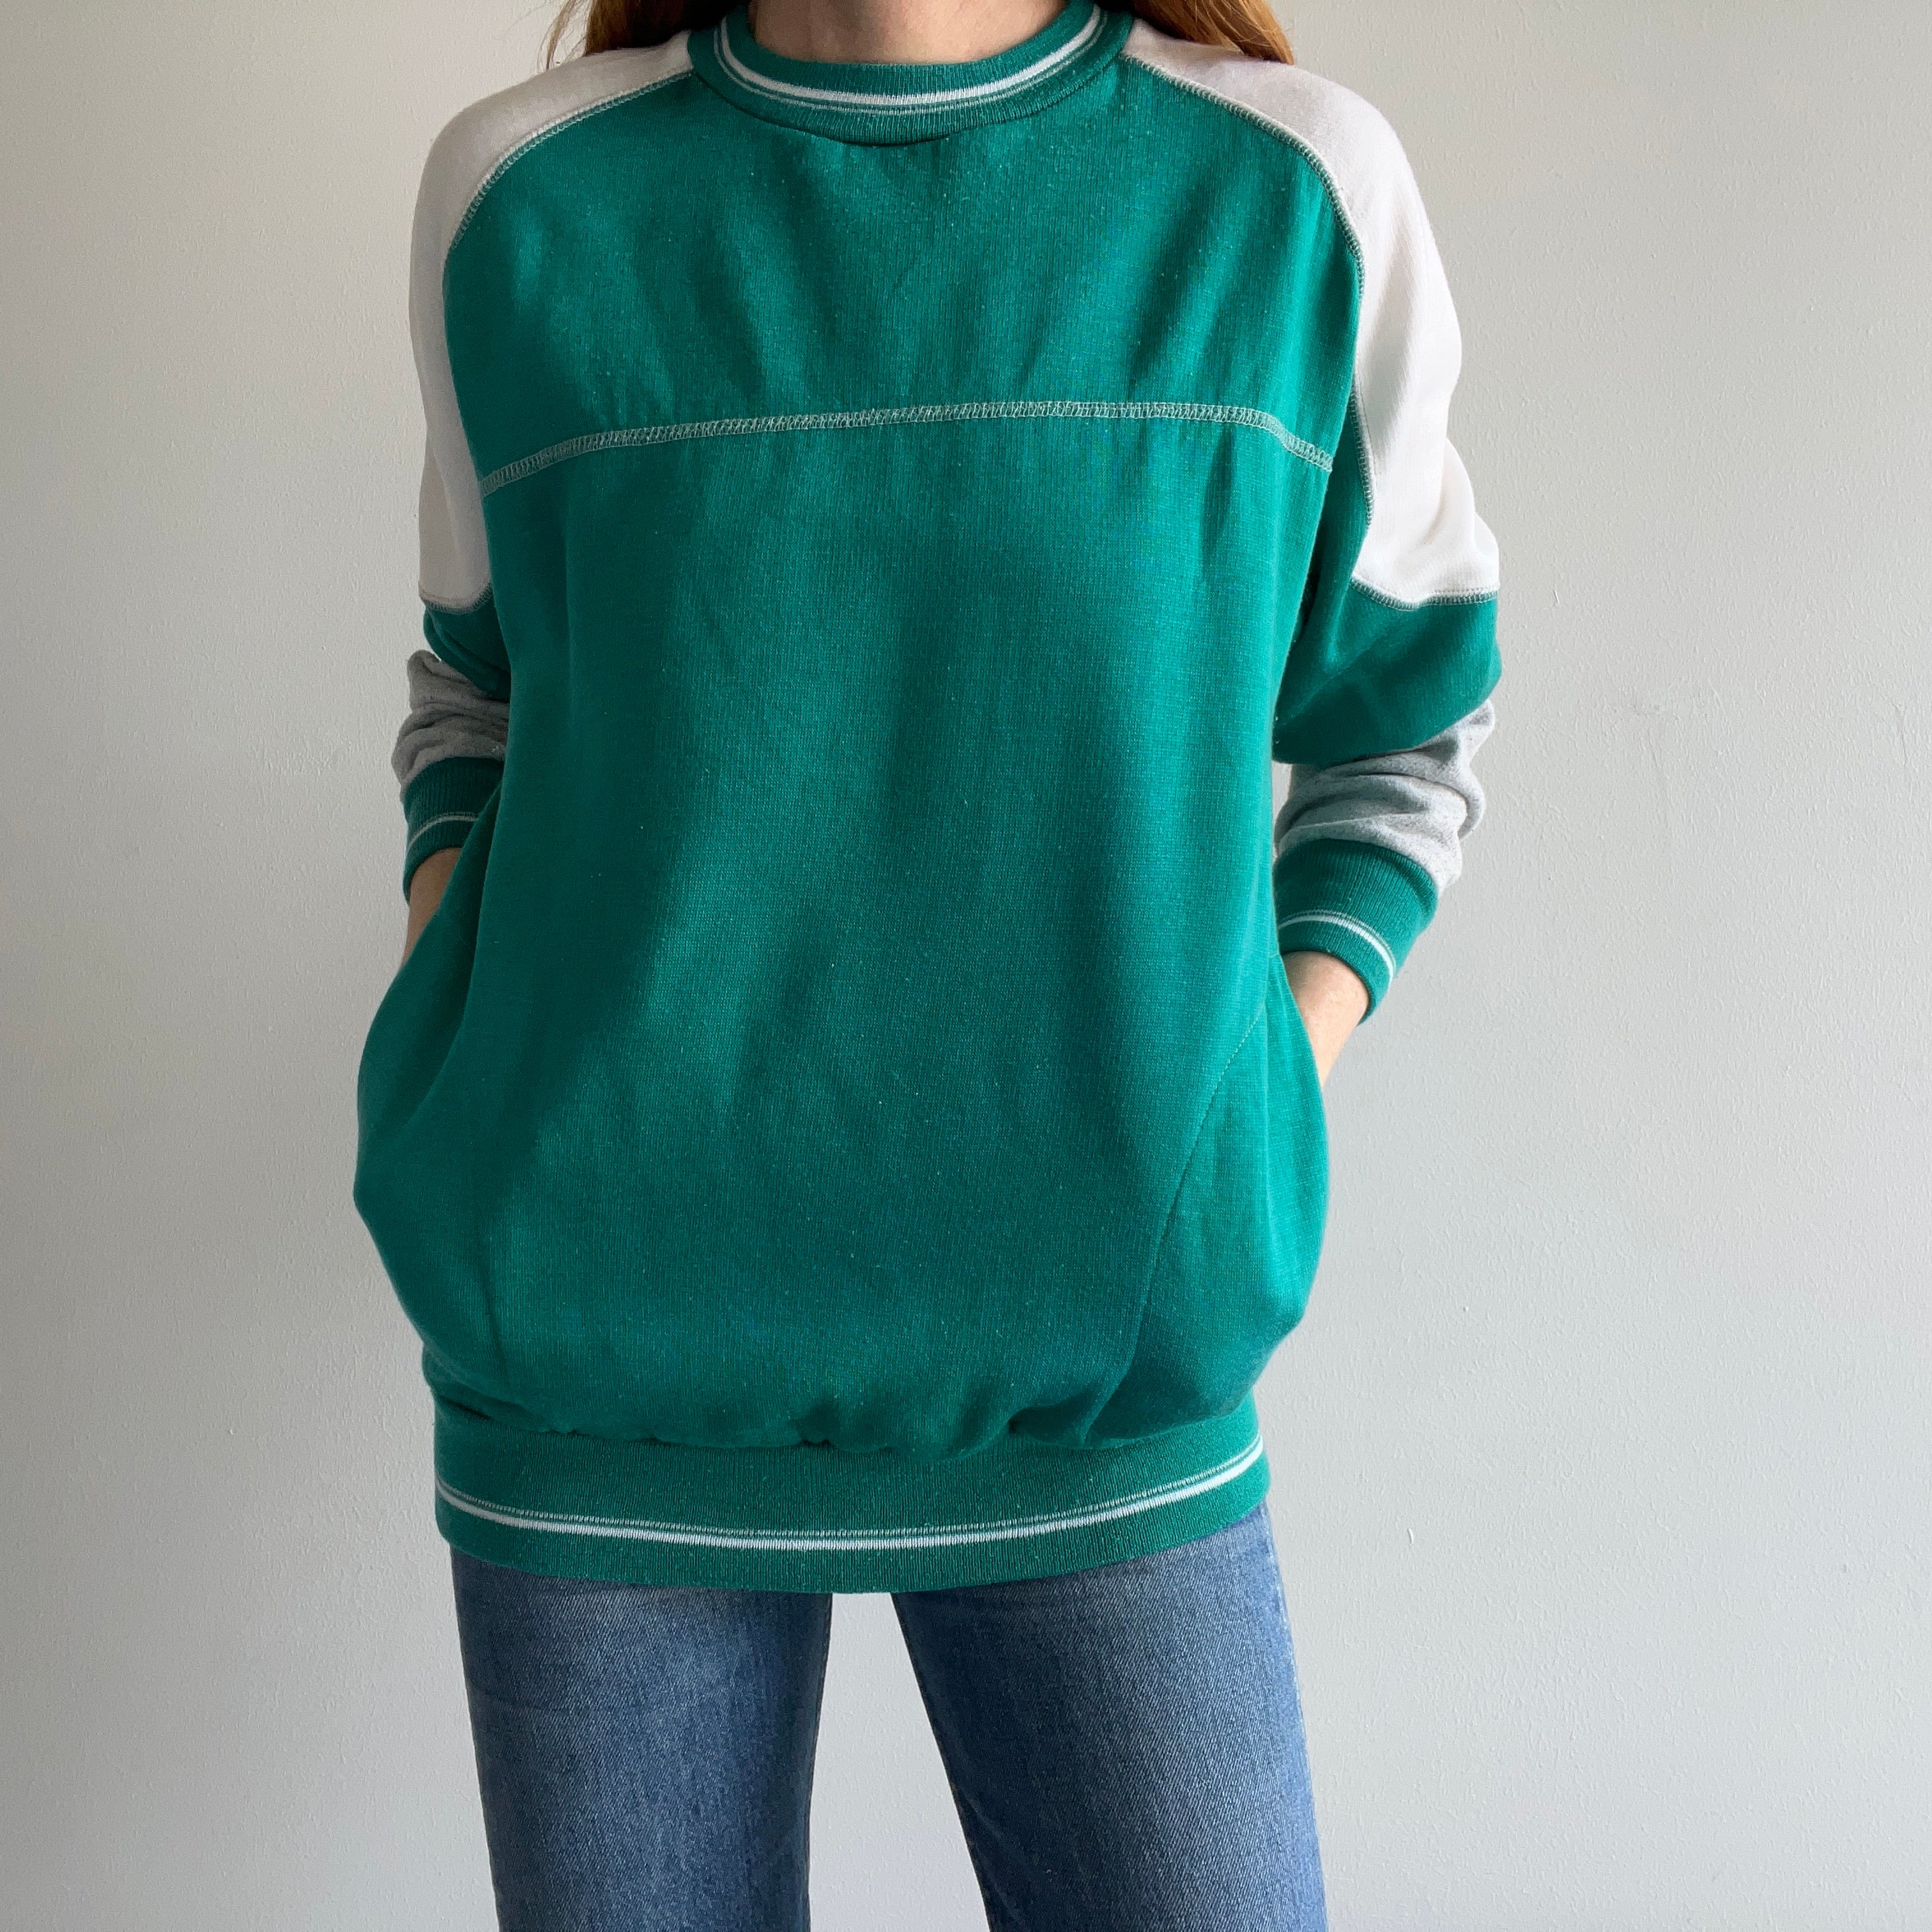 1980s Teal, White and Gray Color Block Sweatshirt